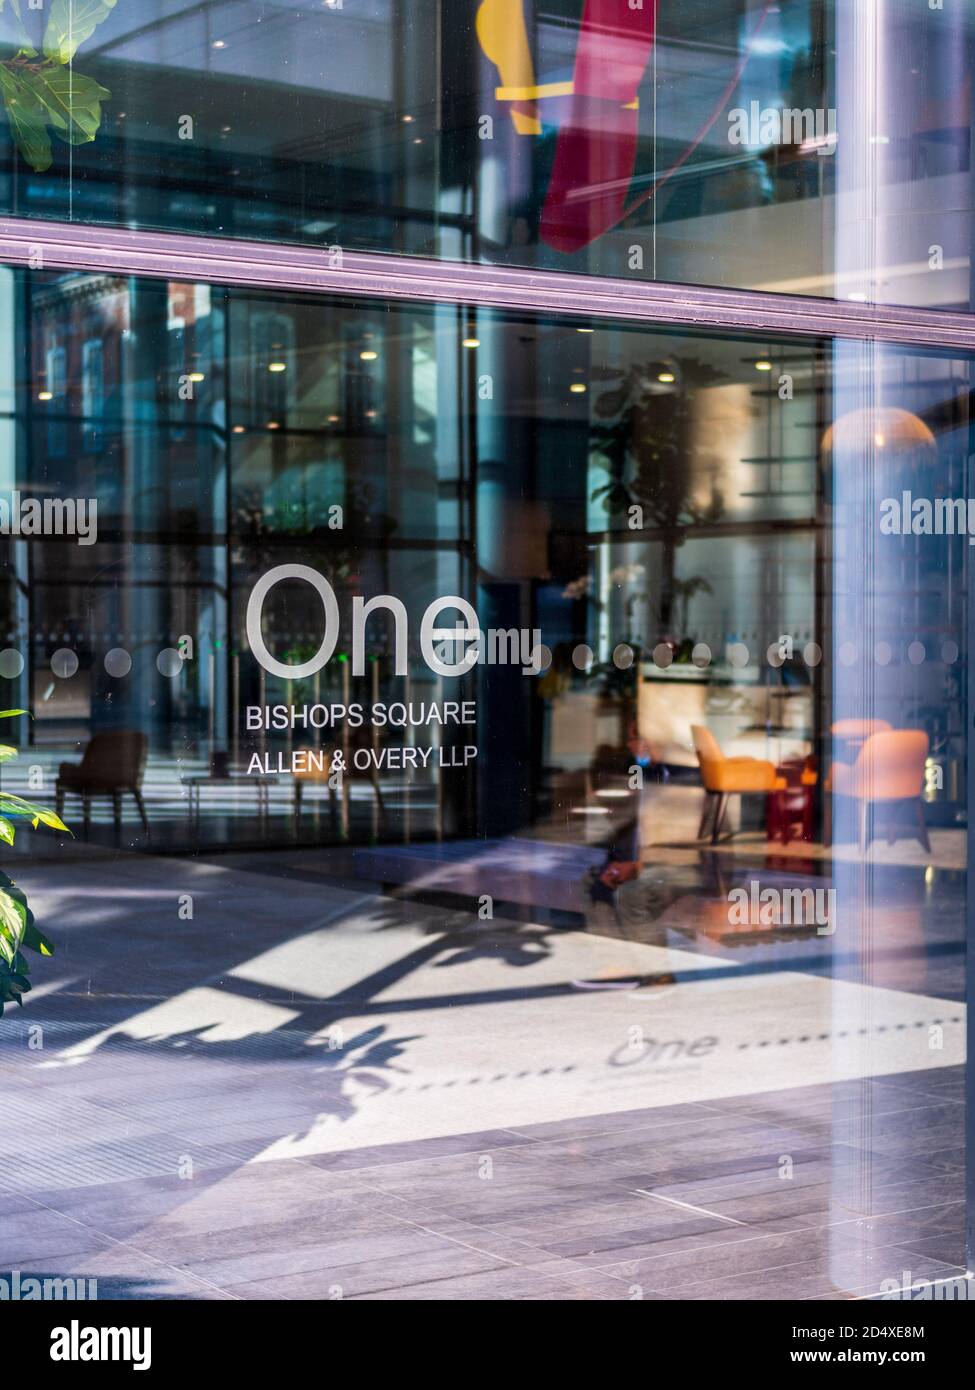 Allen & Overy LLP - Offices of Top Law firm Allen and Overy LLP at One Bishop's Square in London's Spitalfields Market Development Stock Photo